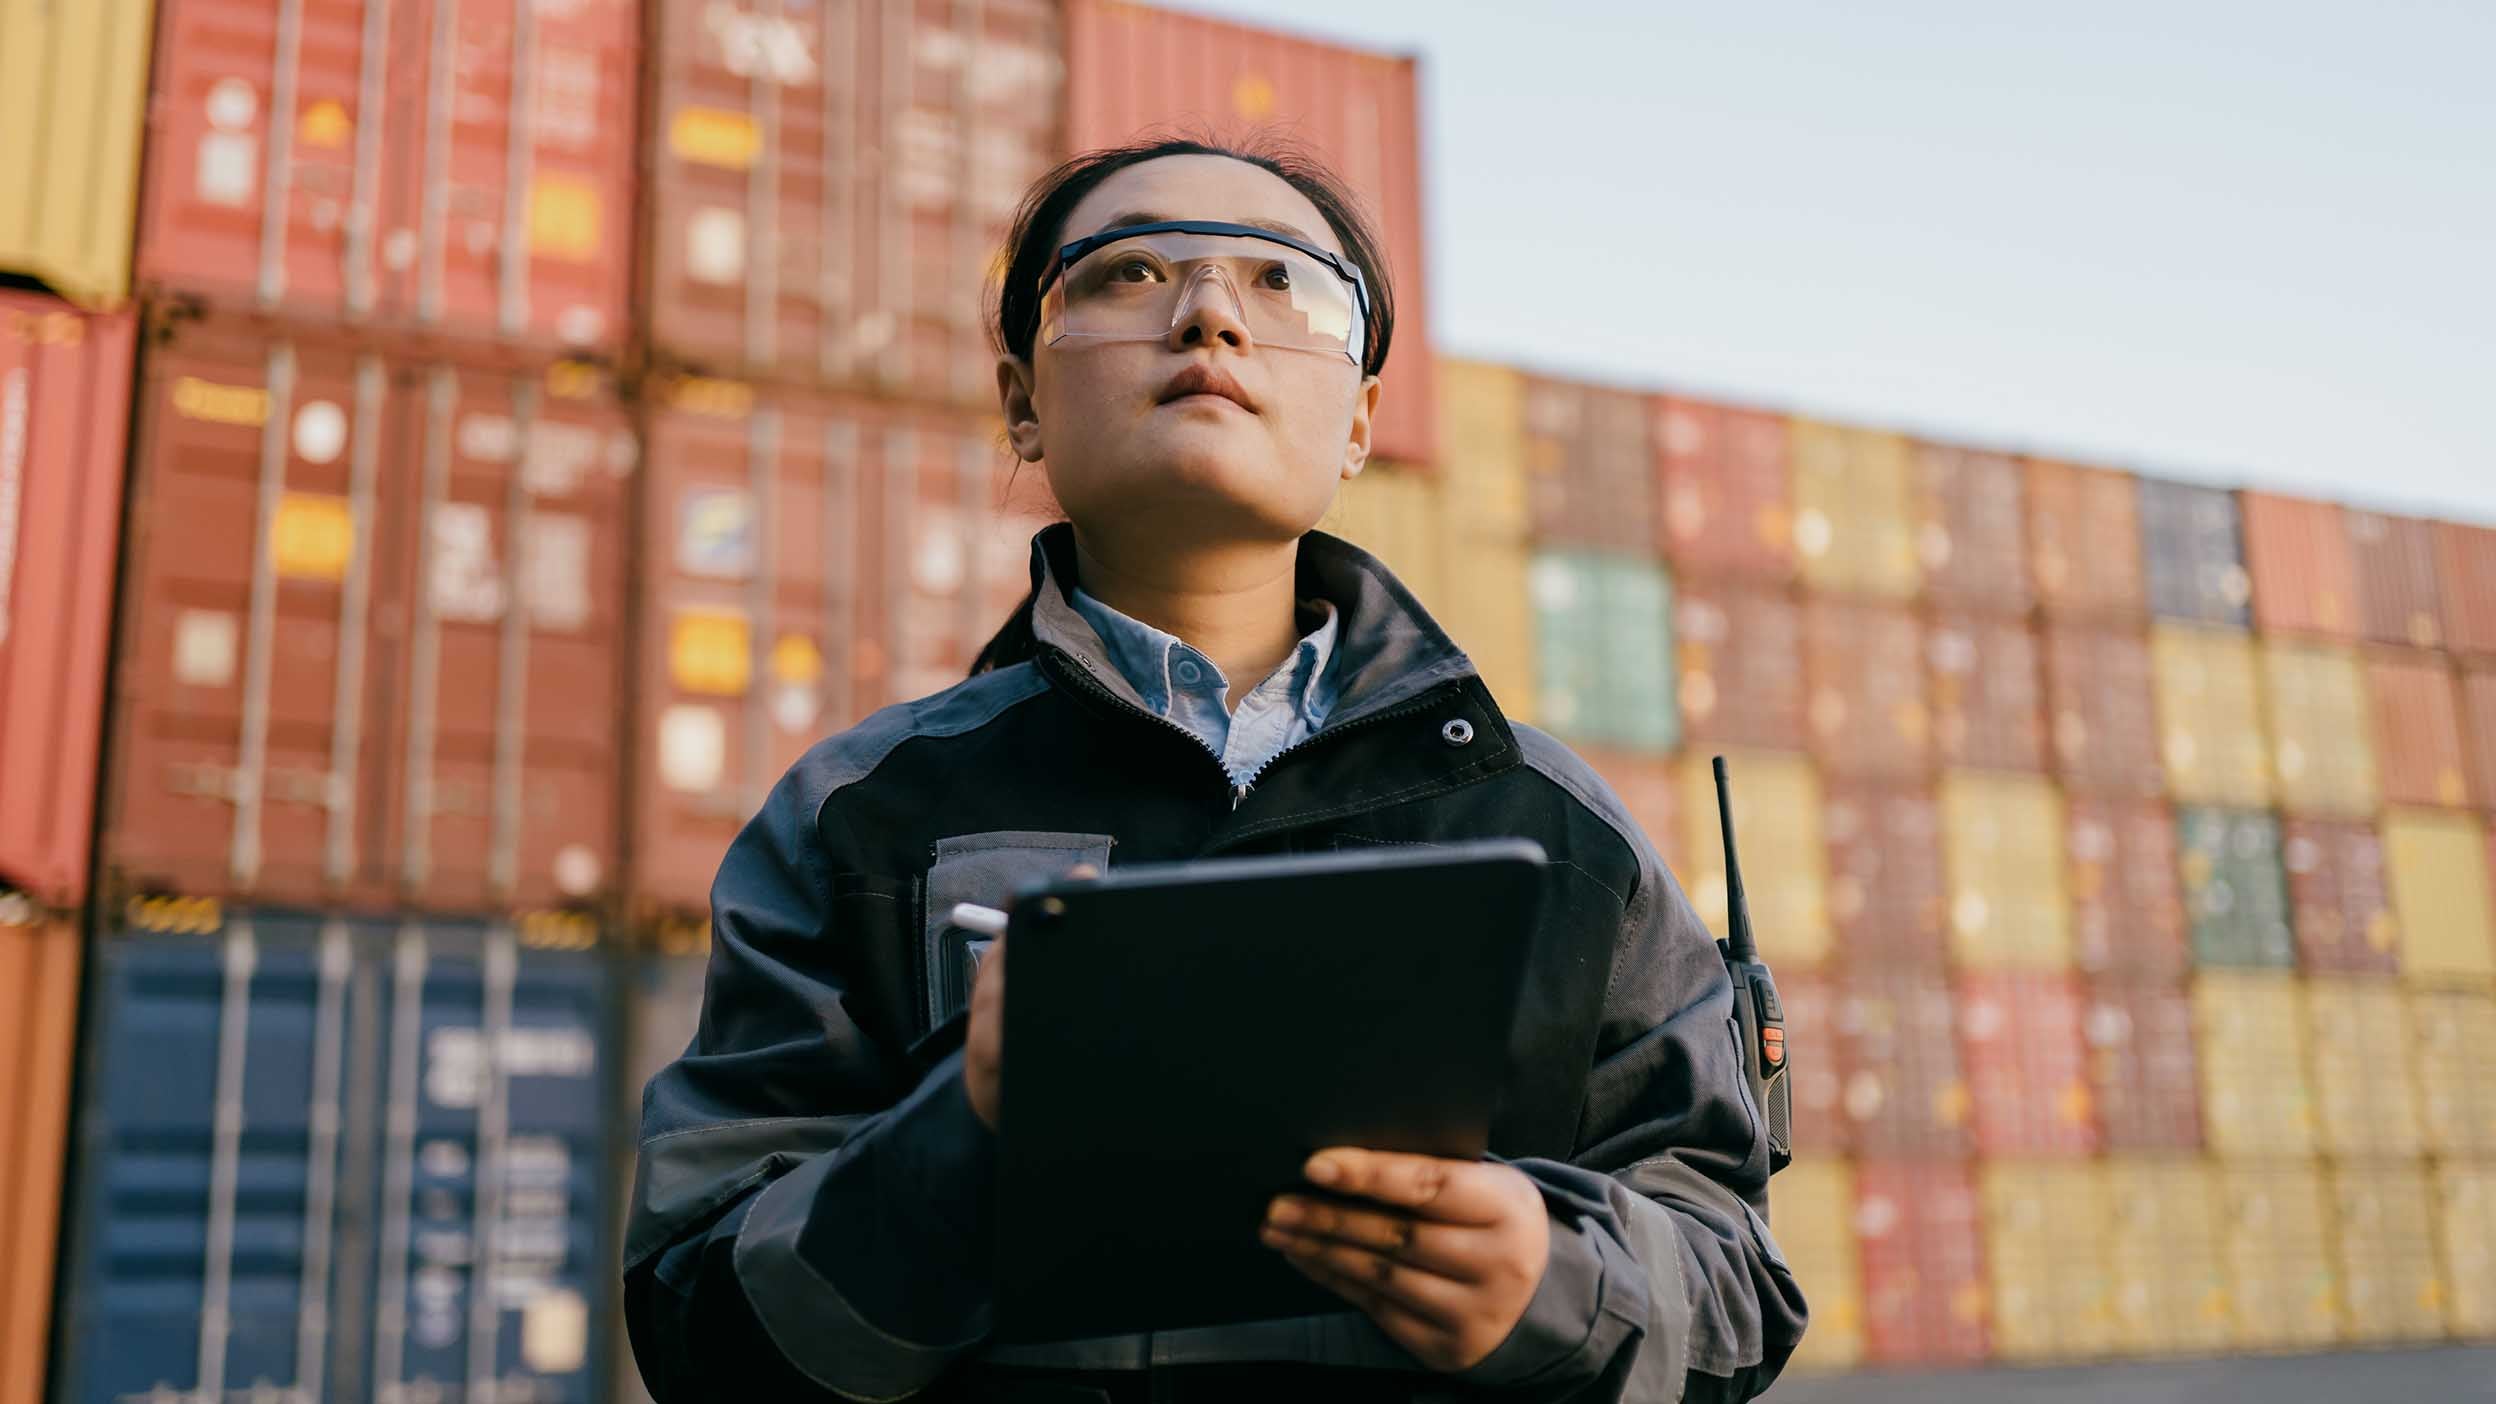 Female Asian inspector wearing safety glasses and carrying a tablet examines containers in a port.